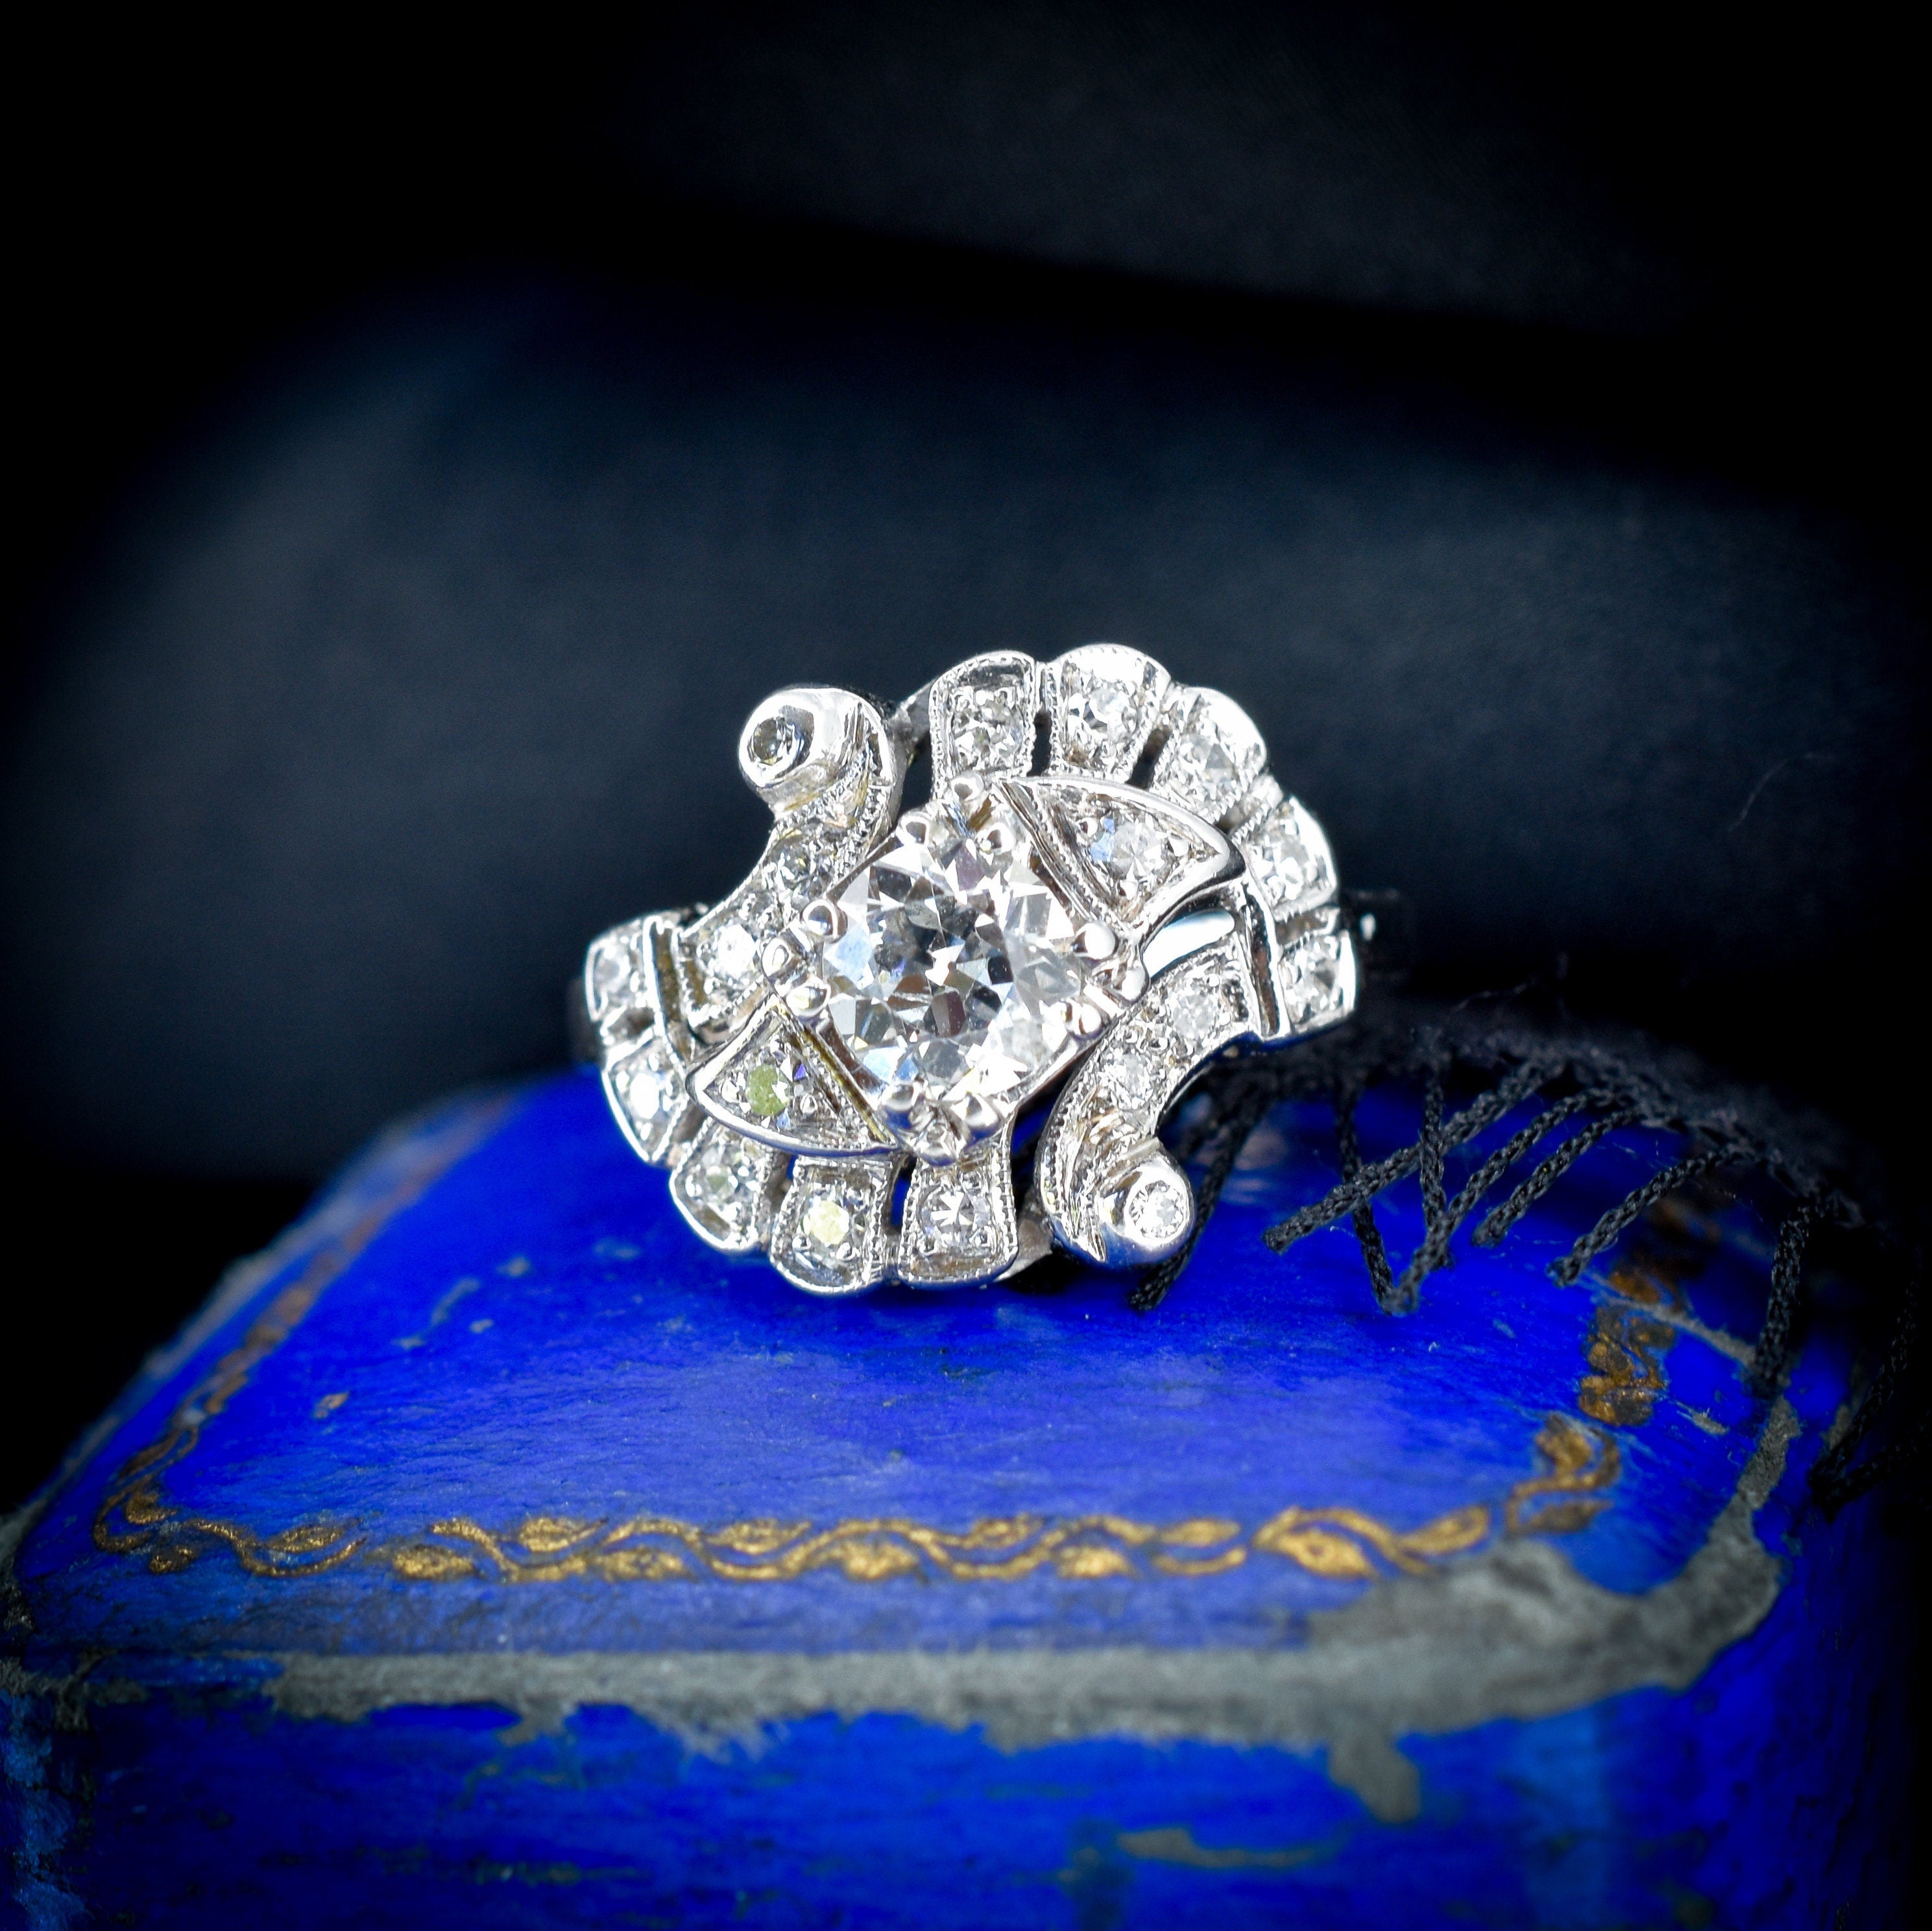 Antique Reproduction Engagement Ring